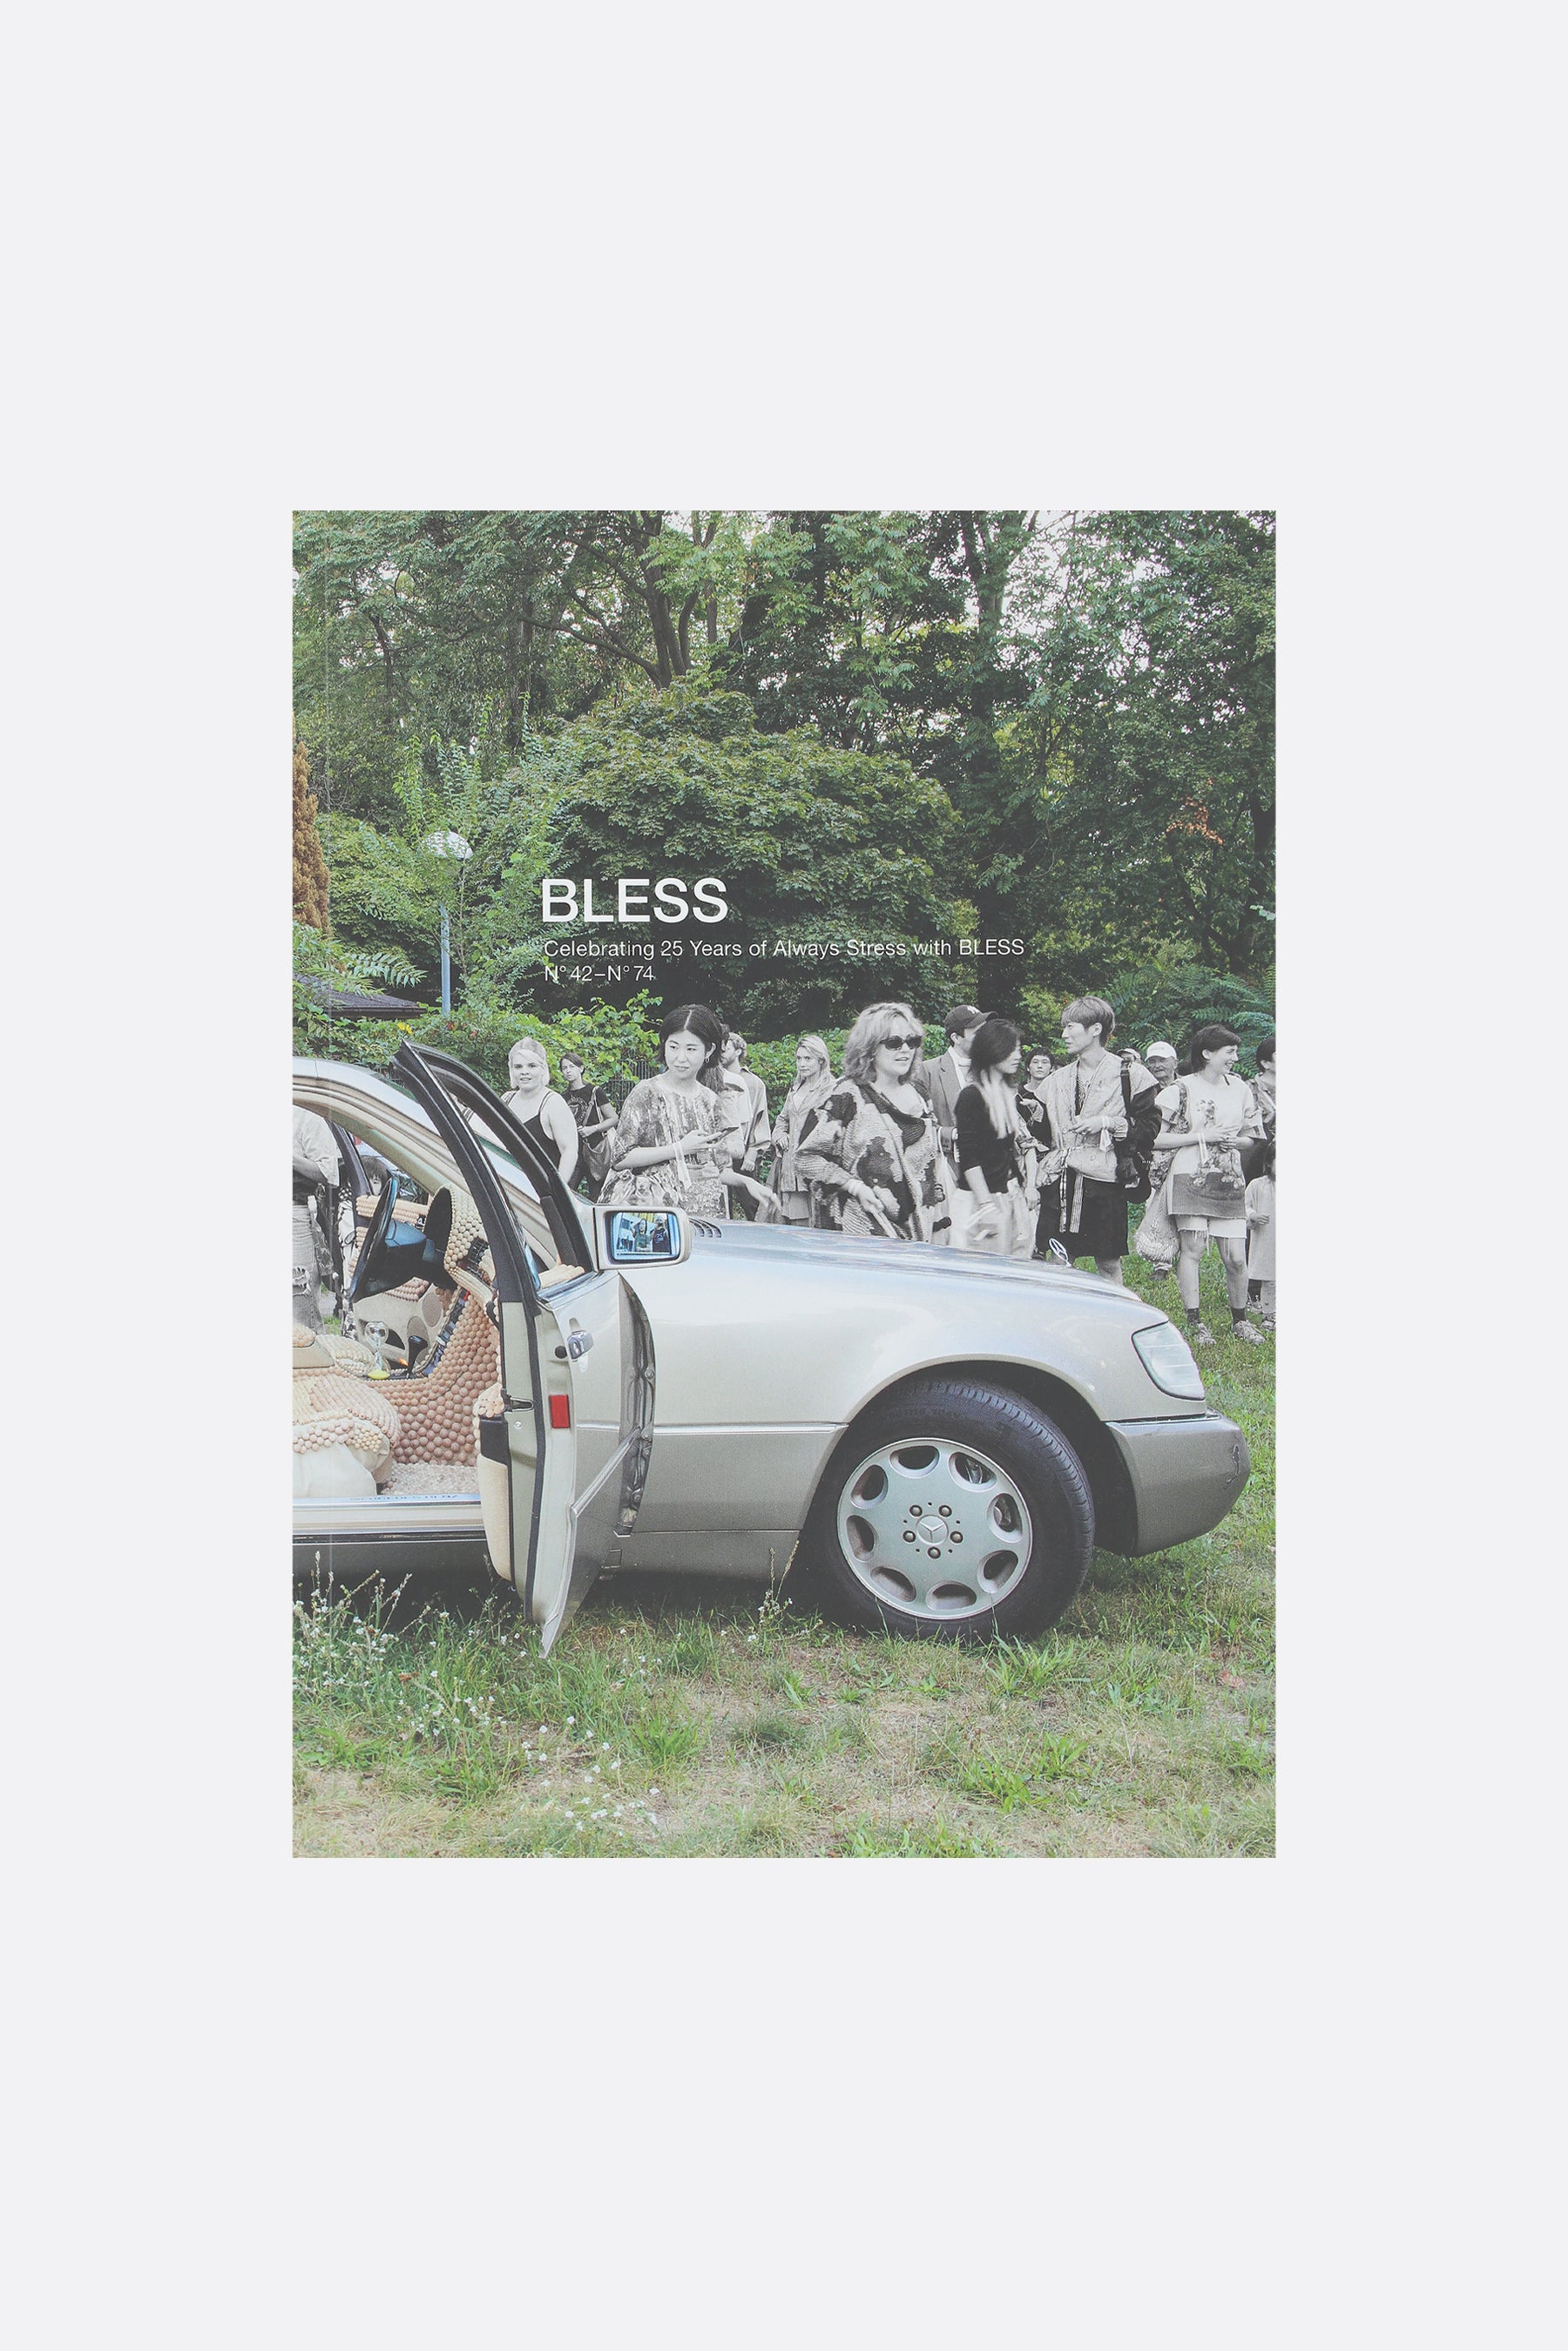 BLESS. Celebrating 25 Years of Always Stress with BLESS N°42 - N°74 Book